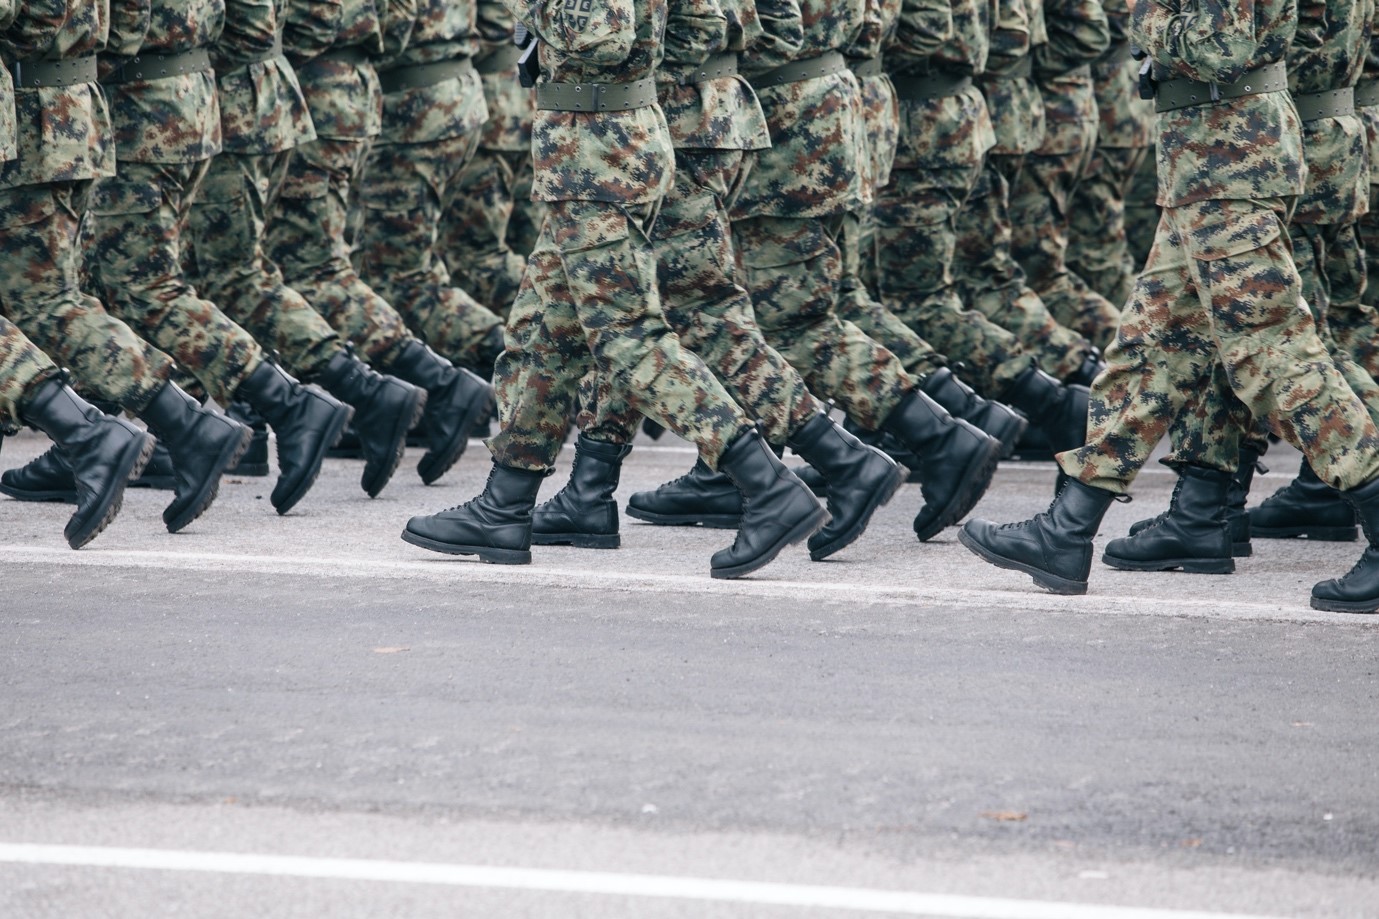 Soldiers dressed in army camouflage march in formation (Credit: Filip Andrejevic, Unsplash)